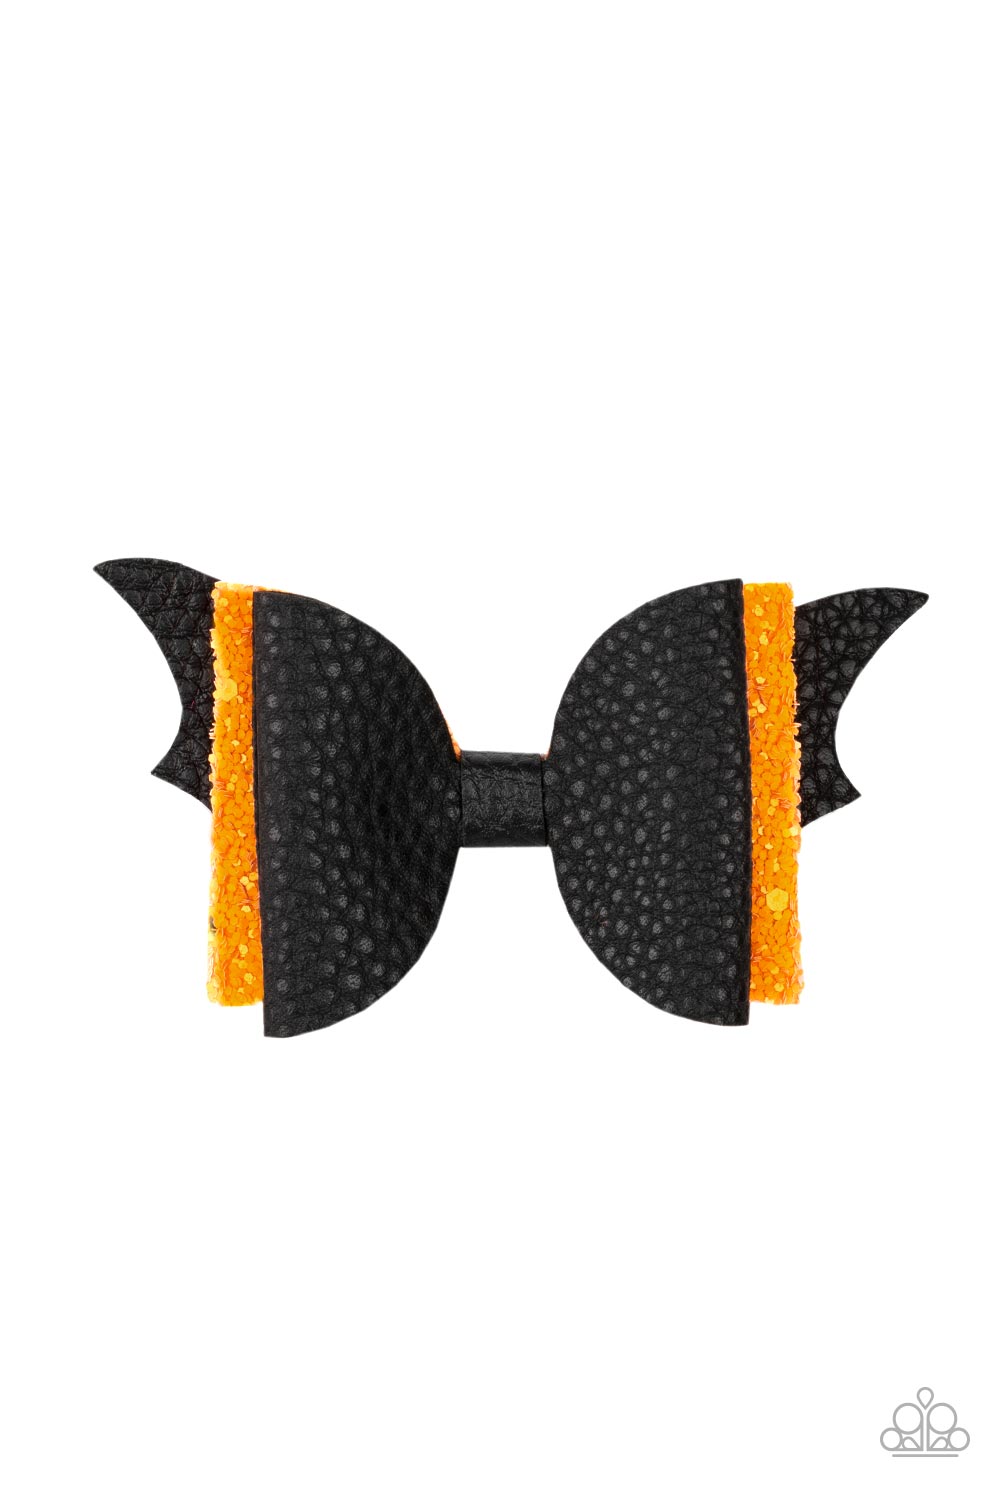 ​SPOOK-taculer, SPOOK-taculer - Black Hair Clips a soft black leather bow and a sparkling bright orange bow pair up to create a SPOOK-tacular impact over the silhouette of black bat wings. Features a standard hair clip on the back.  Paparazzi Jewelry is lead and nickel free so it's perfect for sensitive skin too!